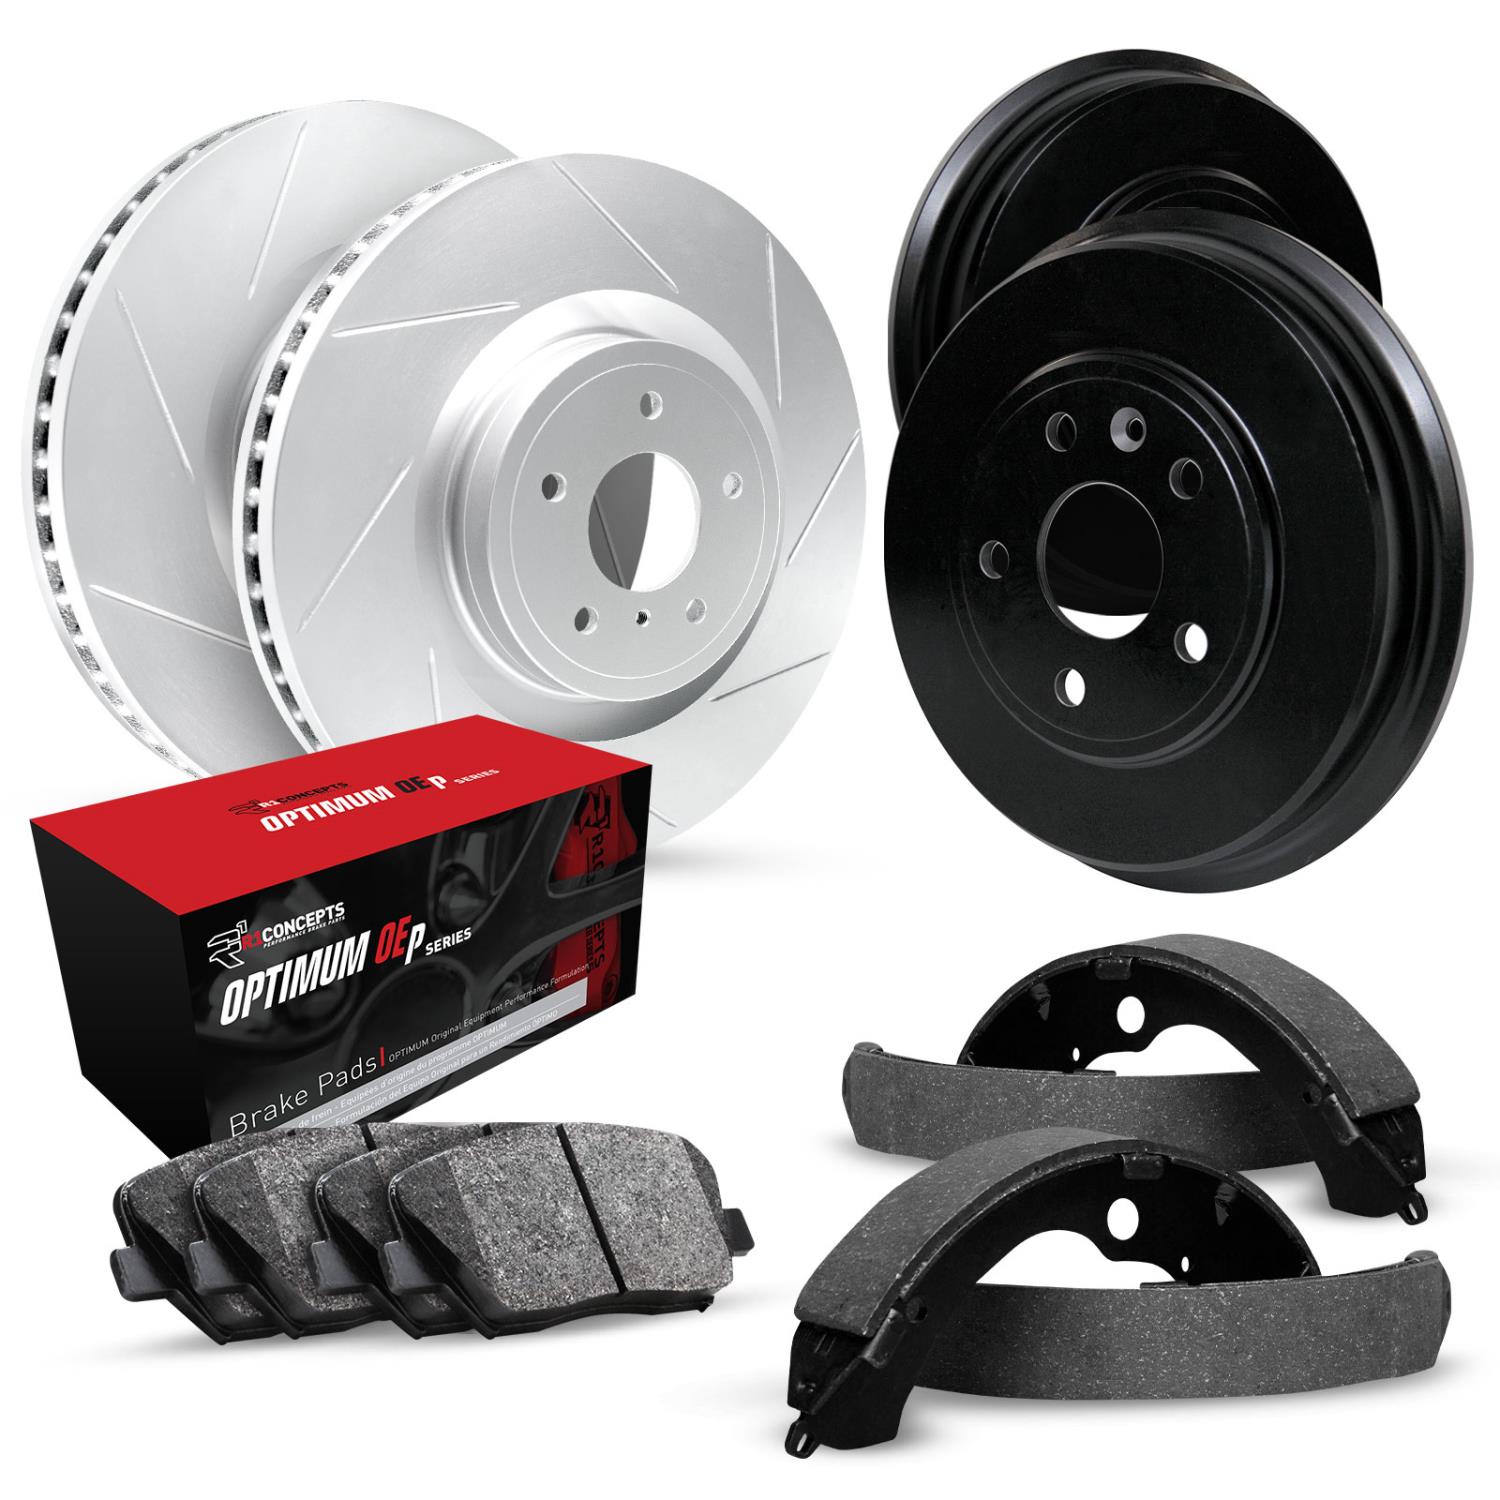 GEO-Carbon Slotted Brake Rotor & Drum Set w/Optimum OE Pads & Shoes, 2013-2019 Infiniti/Nissan, Position: Front & Rear